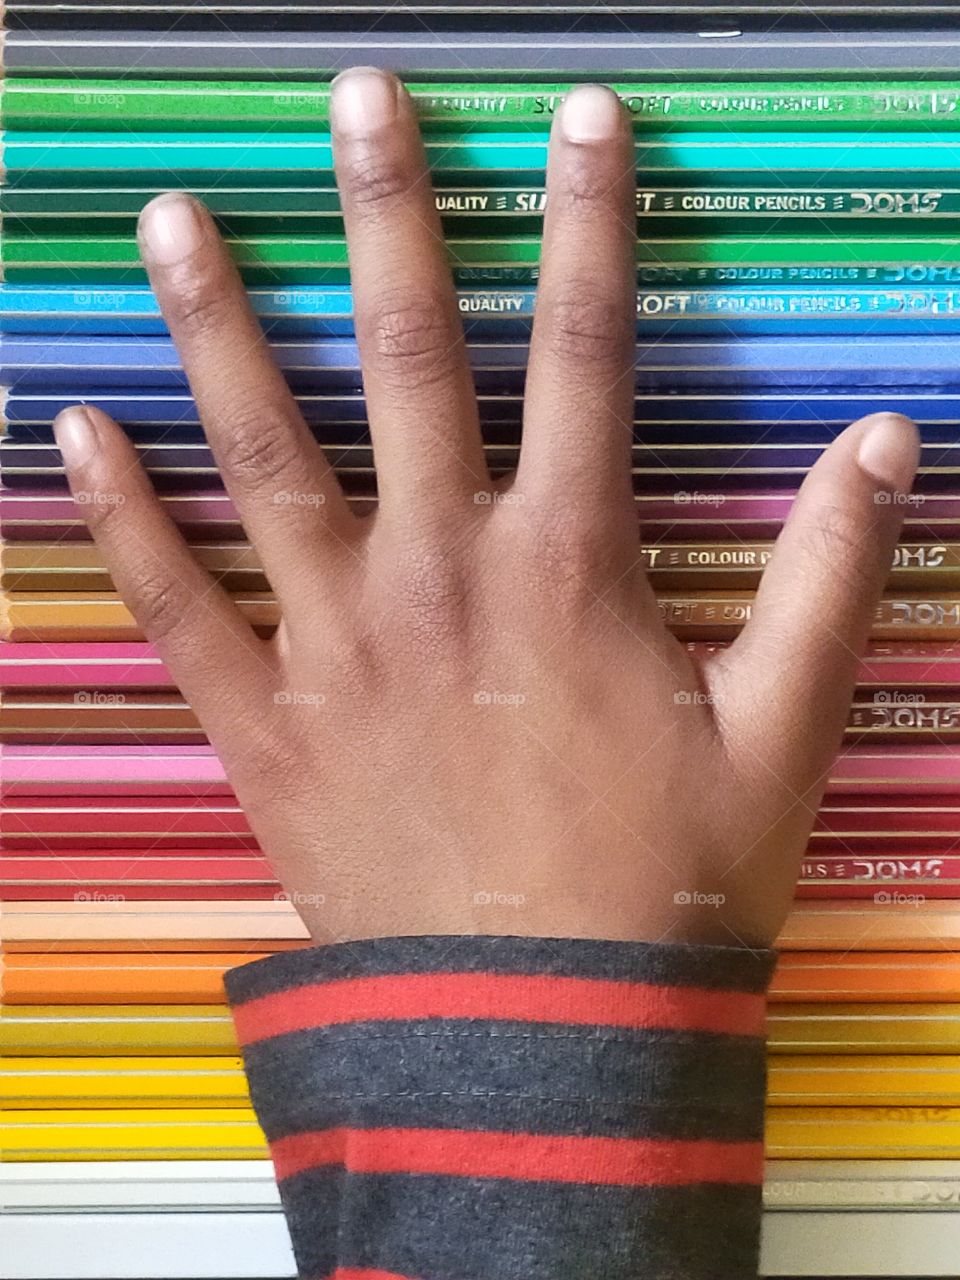 my colorful pencils